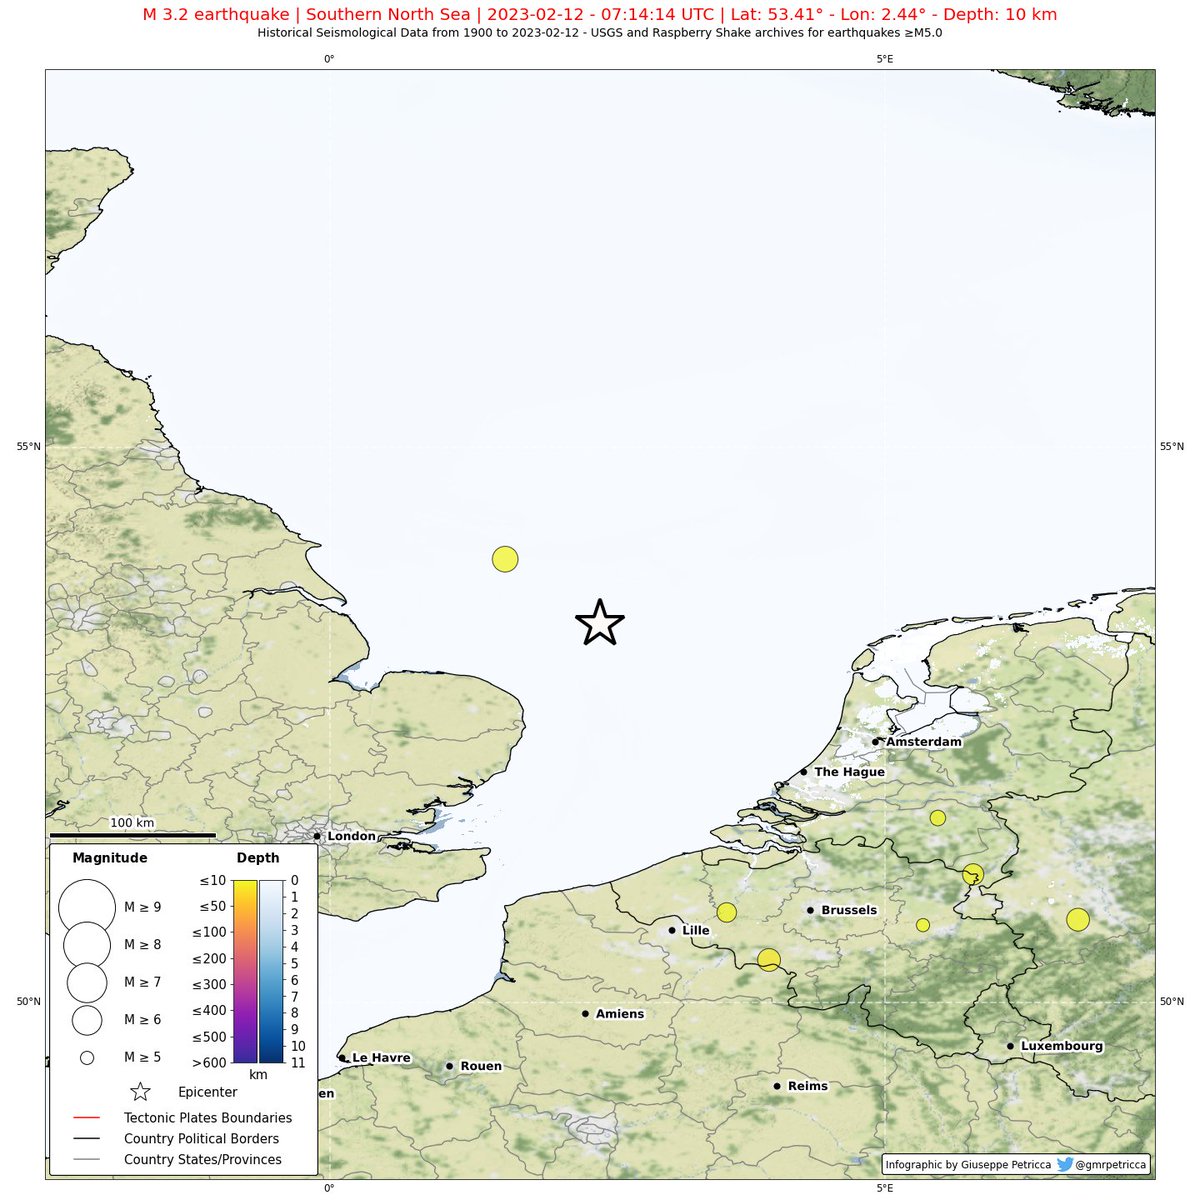 2023-02-12 M3.2 #NorthSea #earthquake recorded from the closest #RaspberryShake in #SouthNorfolk #UK + area historical seismicity.

Clear P and S waves' arrivals on all channels.

Dist.: 120.8km
Travel Time: 0m 20.9s
Depth: 10.0km

#Python @raspishake @matplotlib #CitizenScience